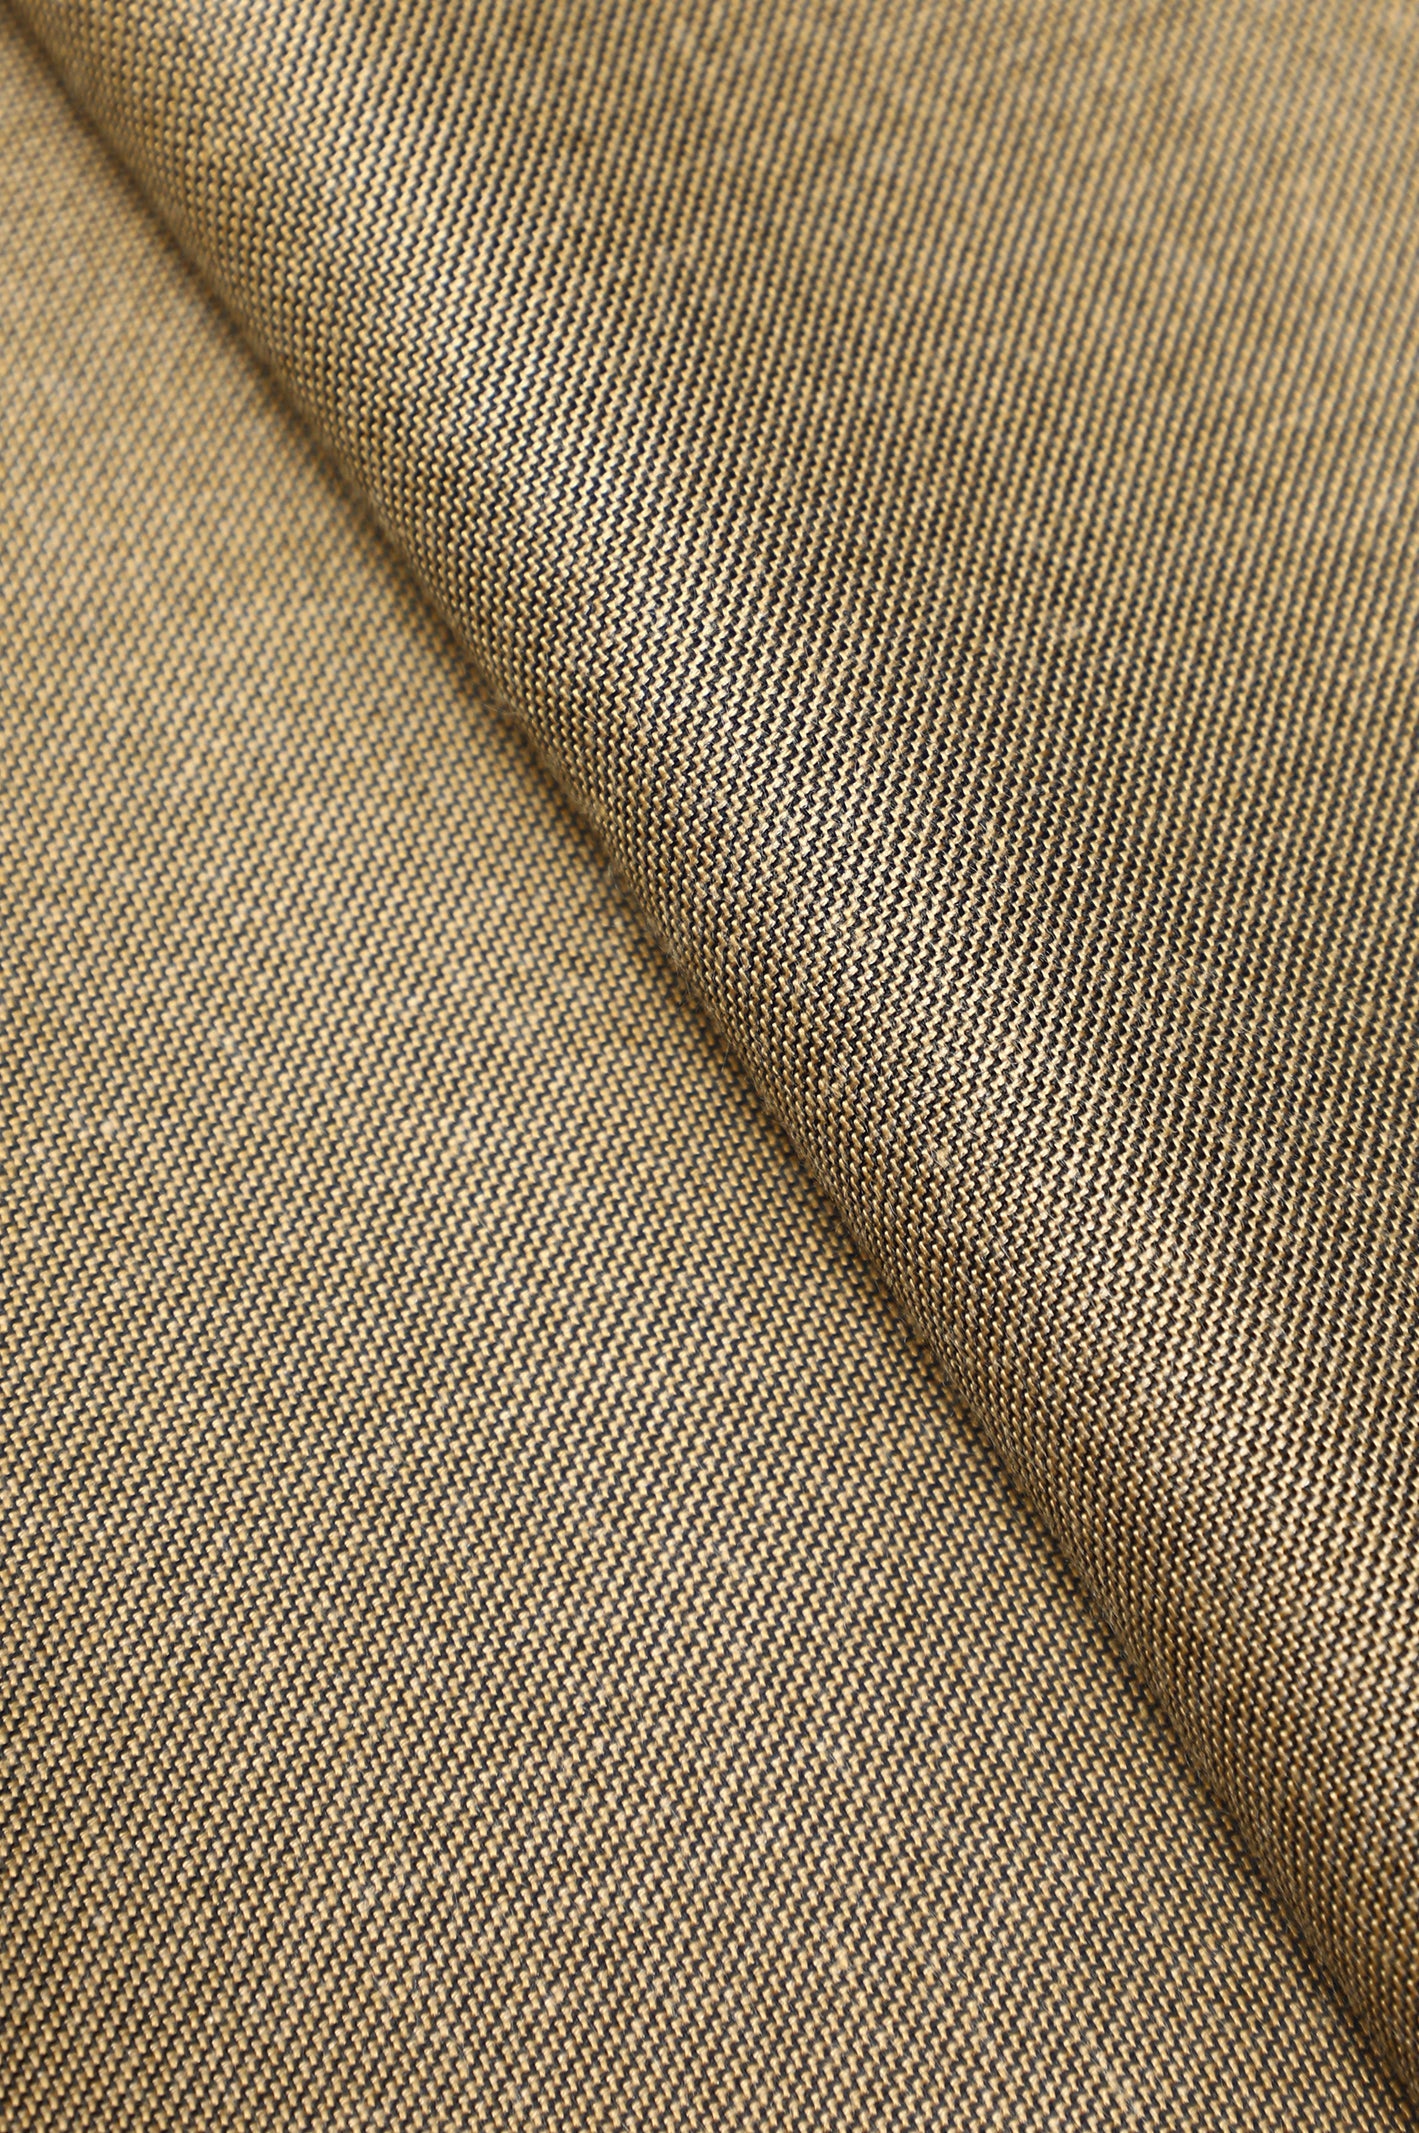 Unstitched Fabric for Men SKU: US0203-FAWN - Diners